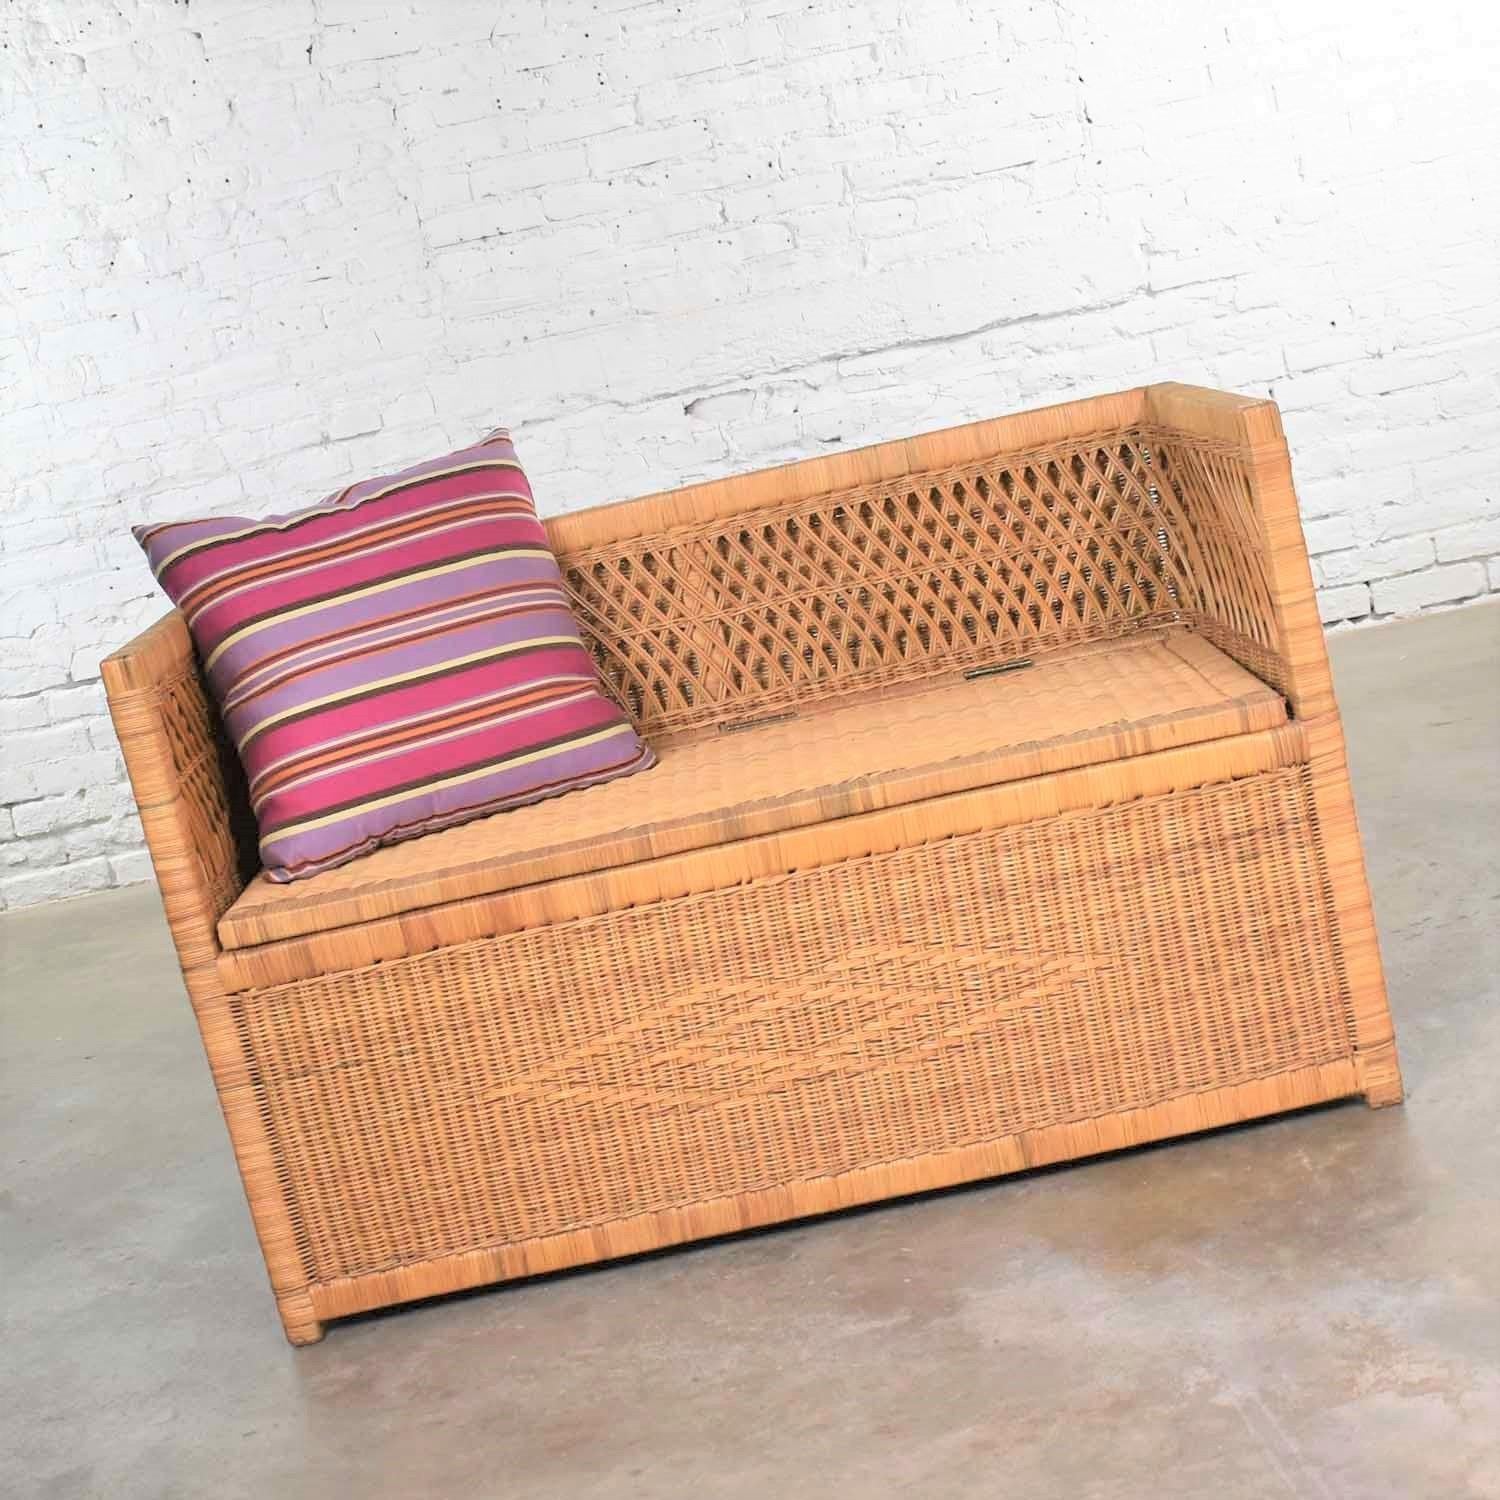 Handsome modern wicker bench settee with trunk style storage in its seat. It is in fabulous vintage condition with no outstanding flaw we can find. Please see photos, circa 1970s-1980s. We have shown it with a pillow which we can include or